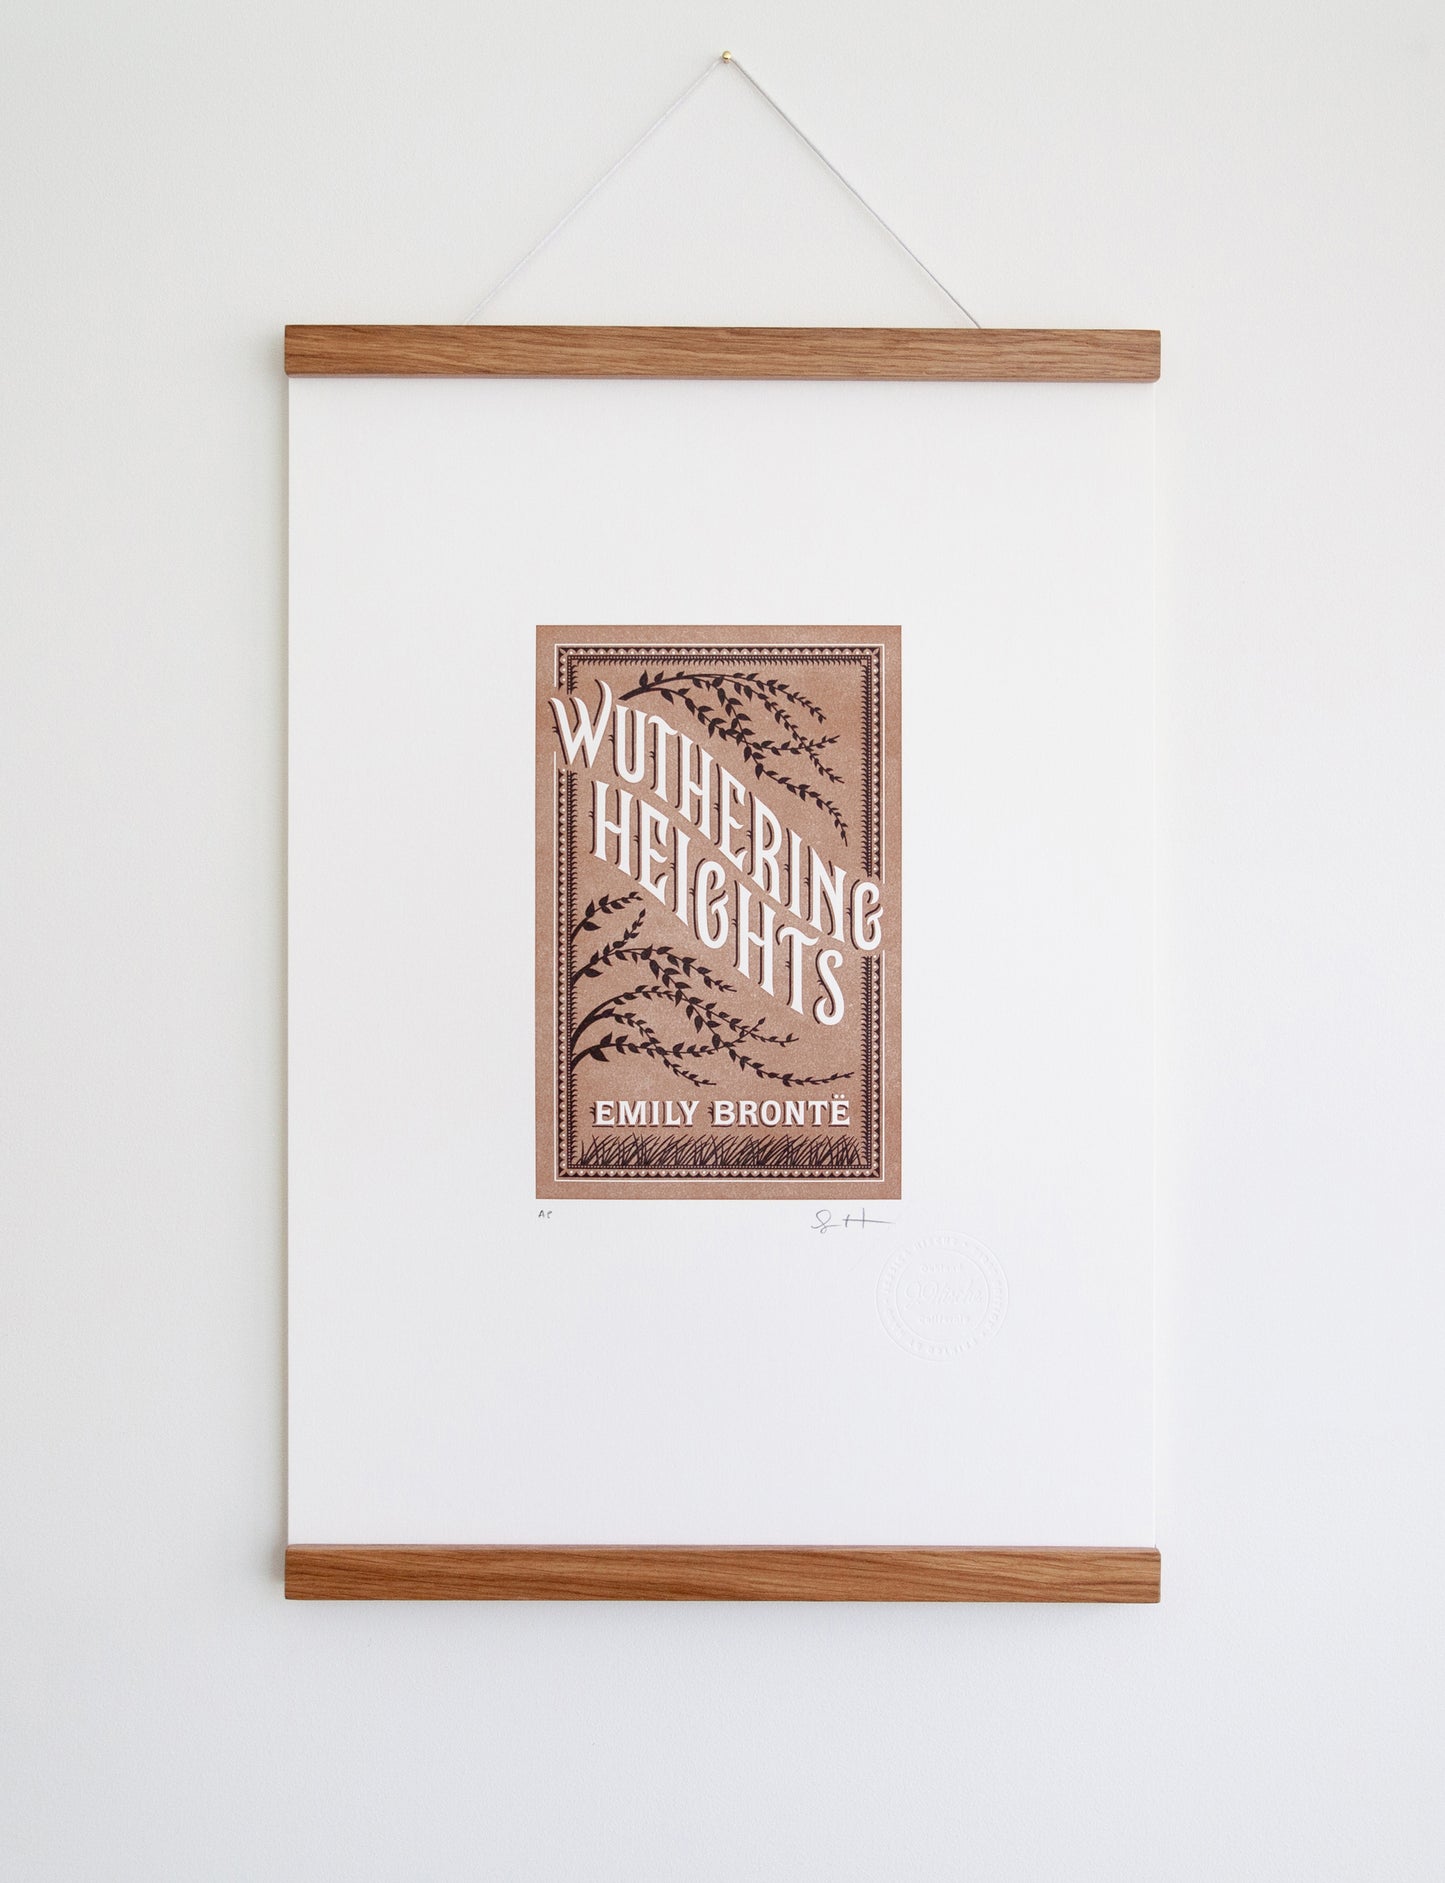 Framed 2-color letterpress print in brown and black. Printed artwork is an illustrated book cover of Wuthering Heights including custom hand lettering.